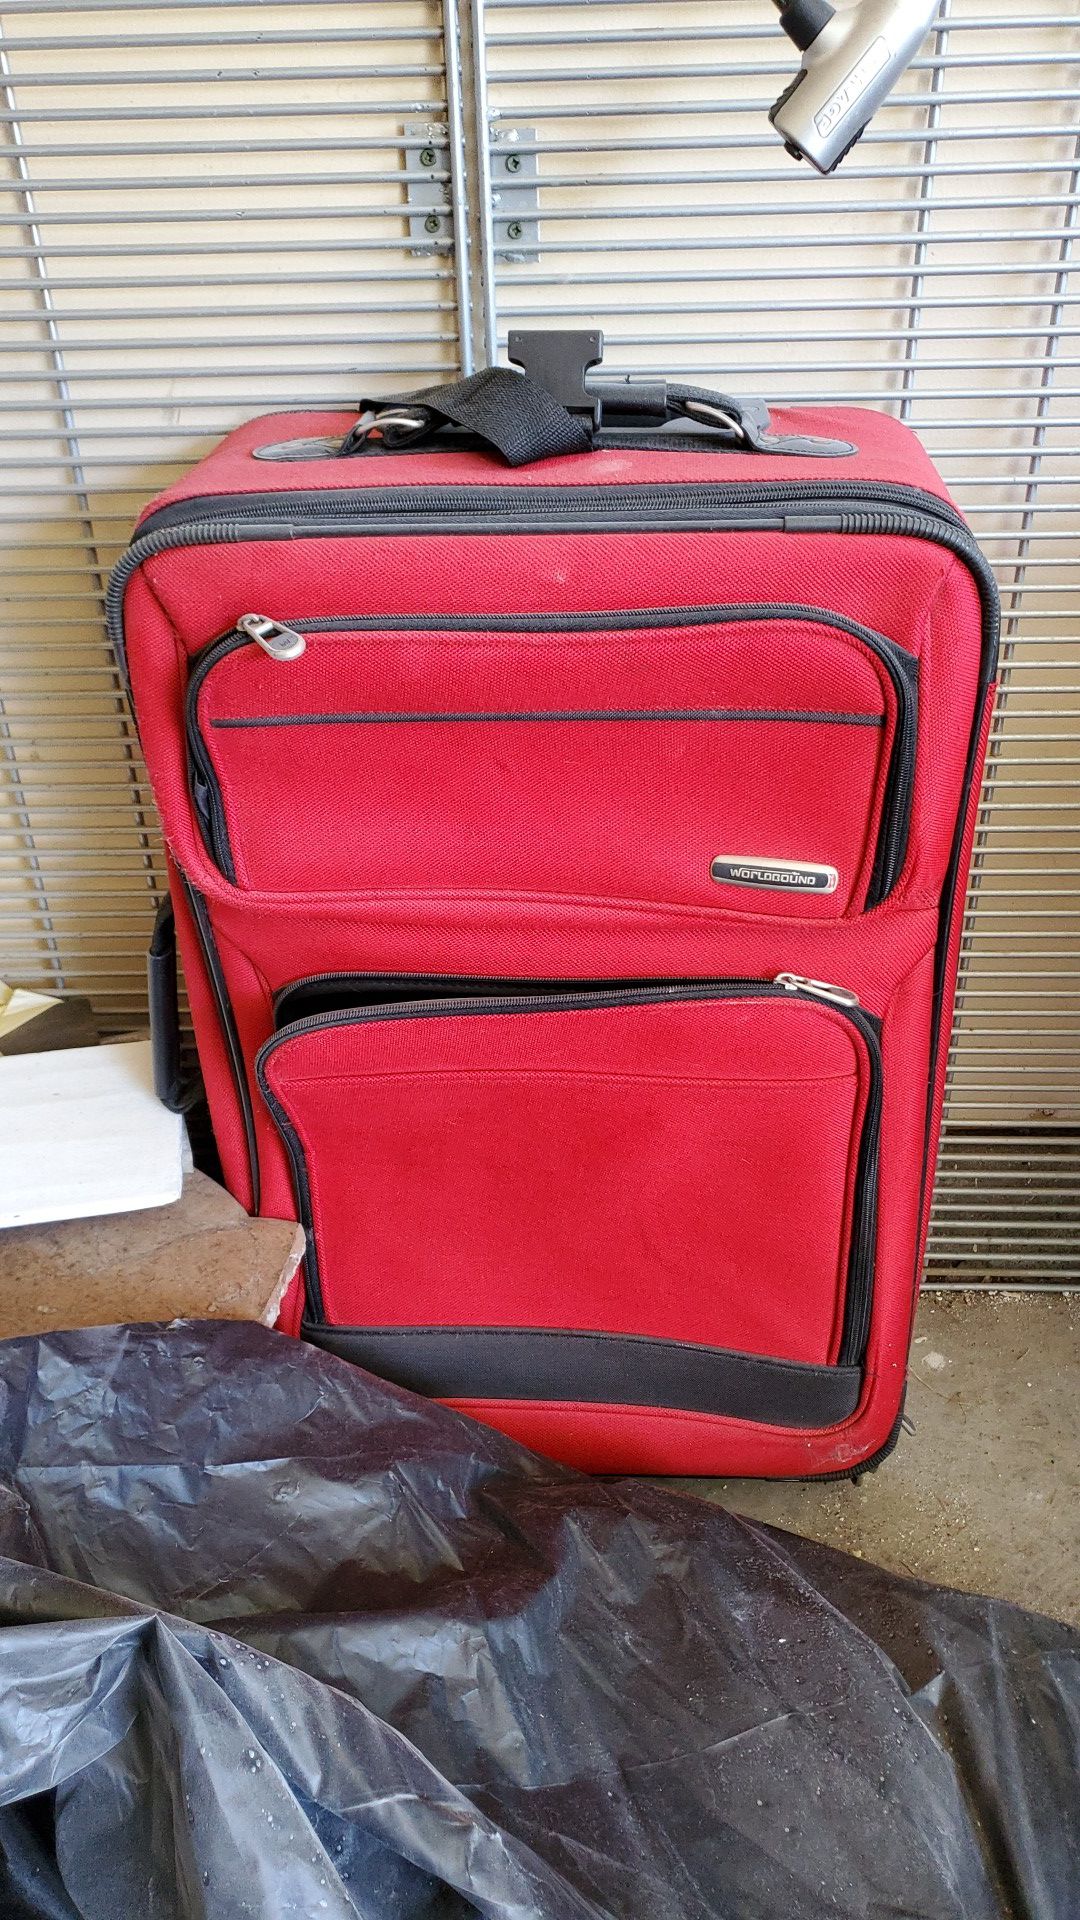 Red travel suitcase